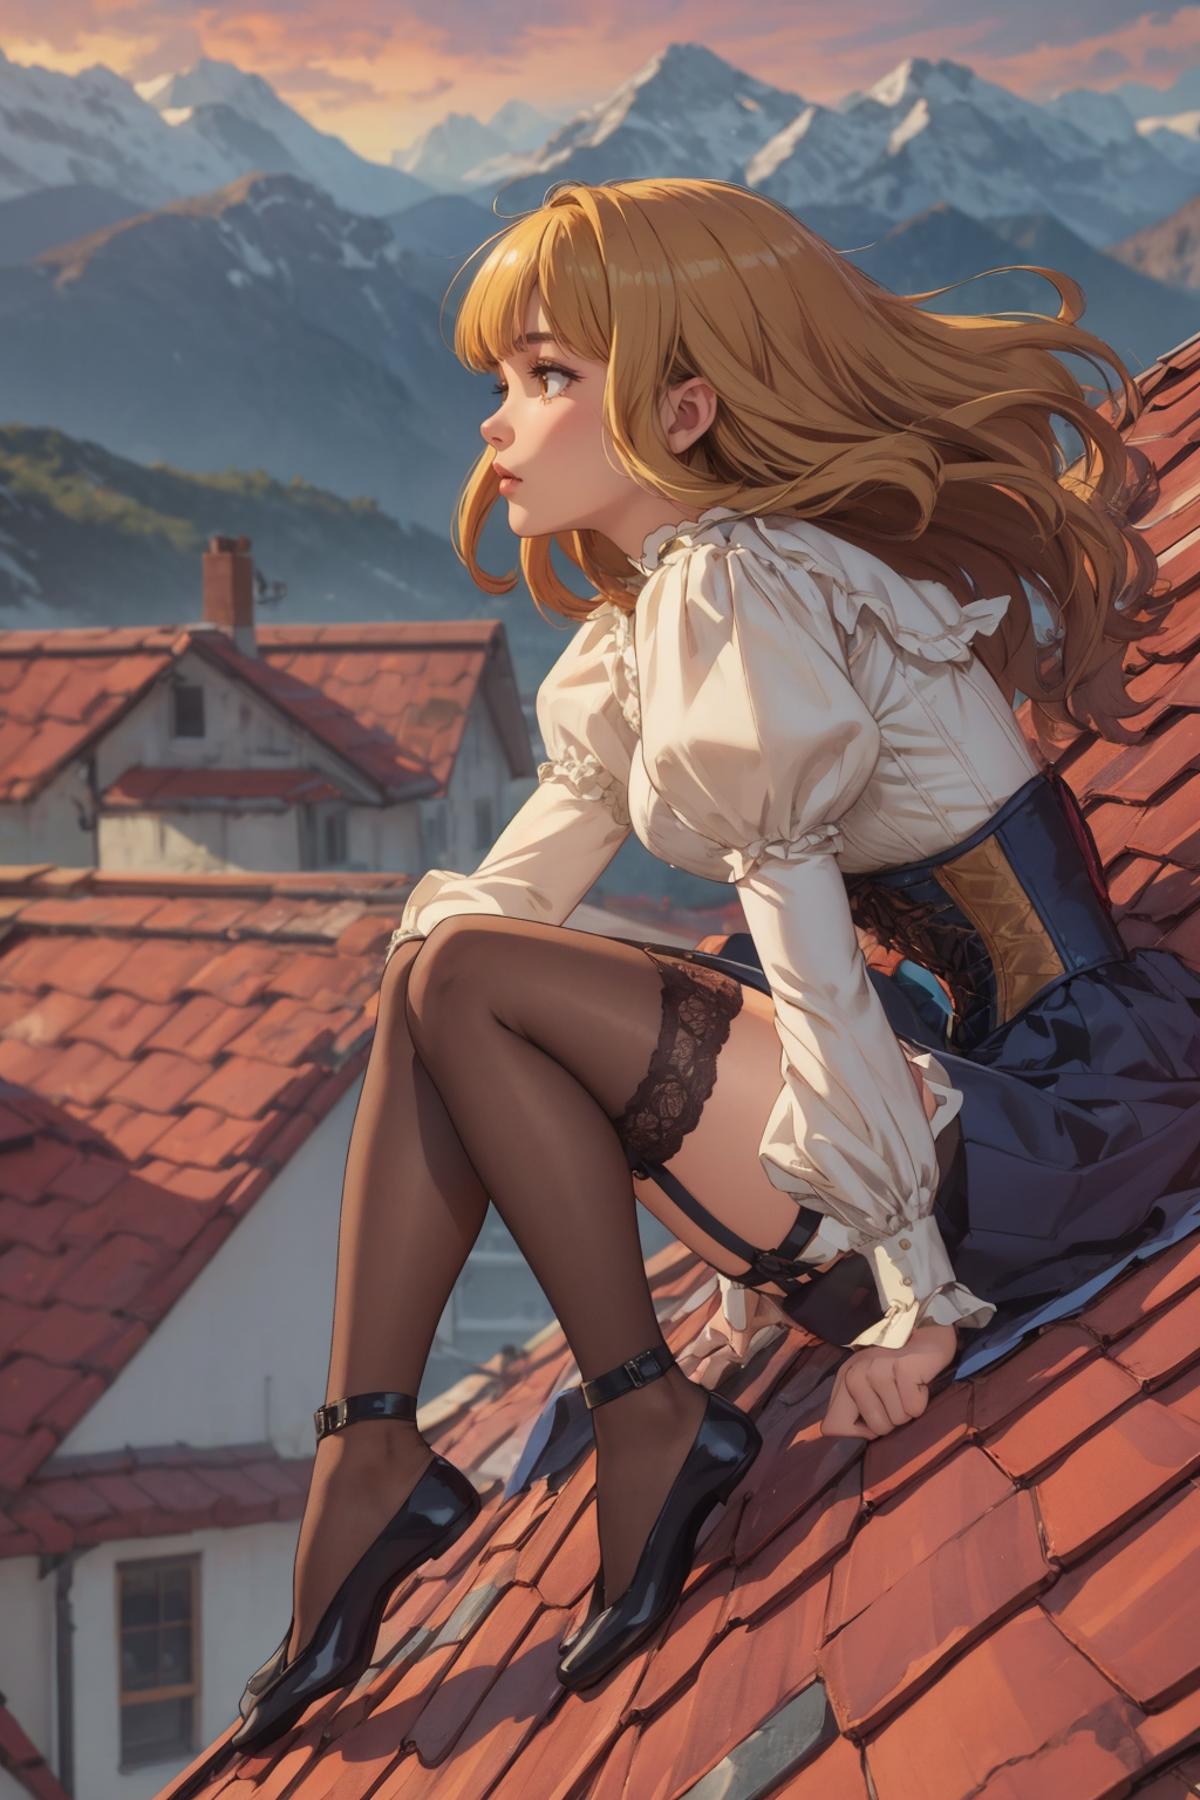 A woman sits on a rooftop with a view of the town.